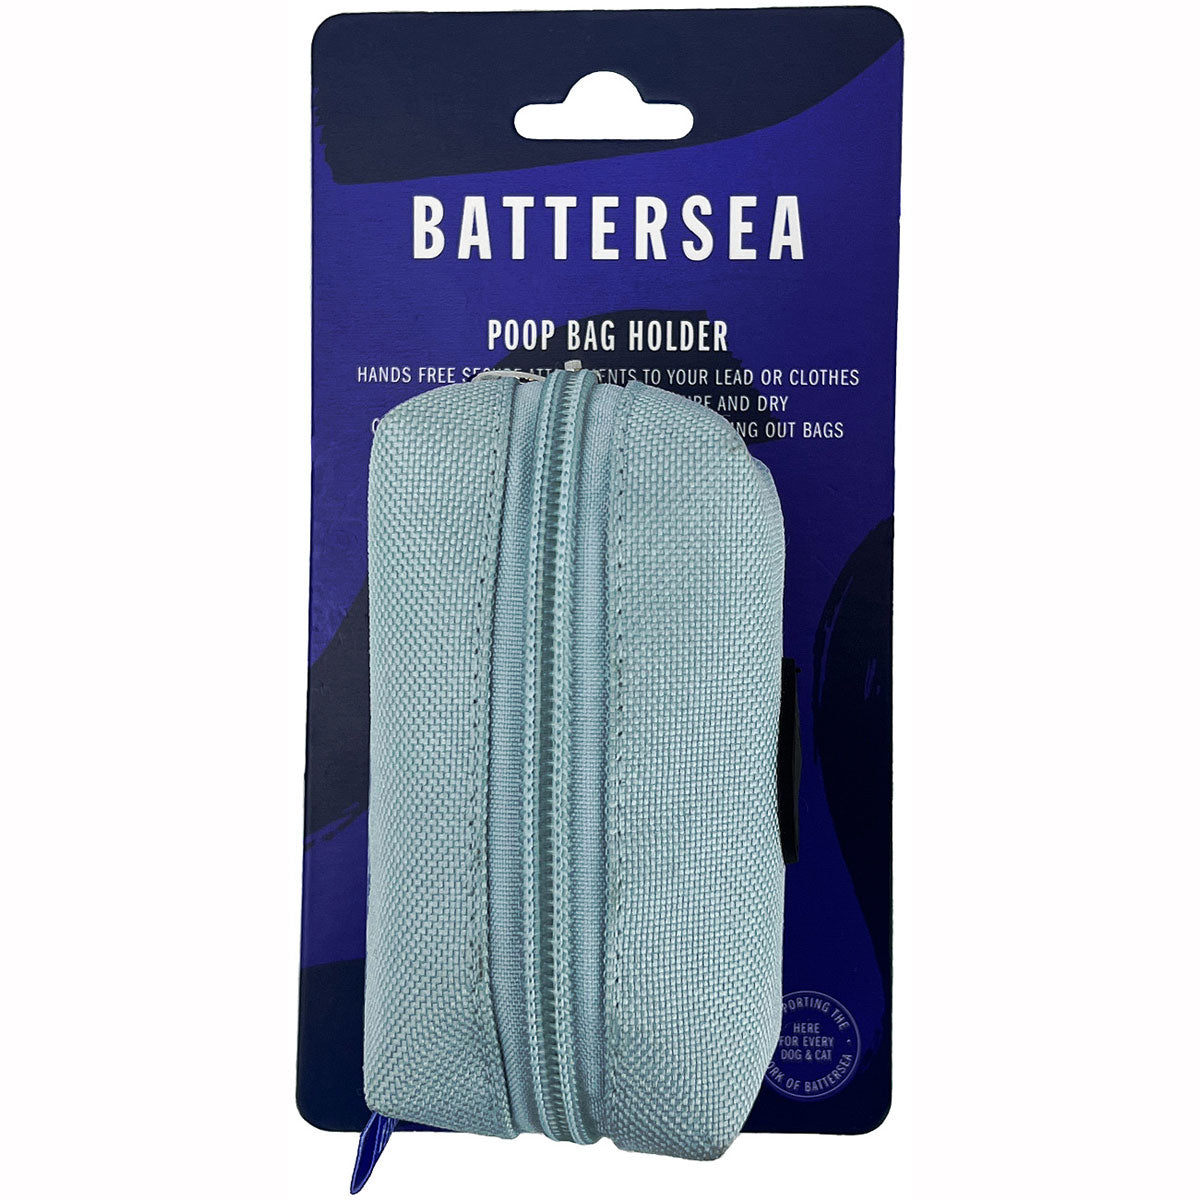 The Battersea Poop Bag Holder: Lightweight & portable, elevate your strolls with the convenience of the Battersea Poop Bag HolderPackaging